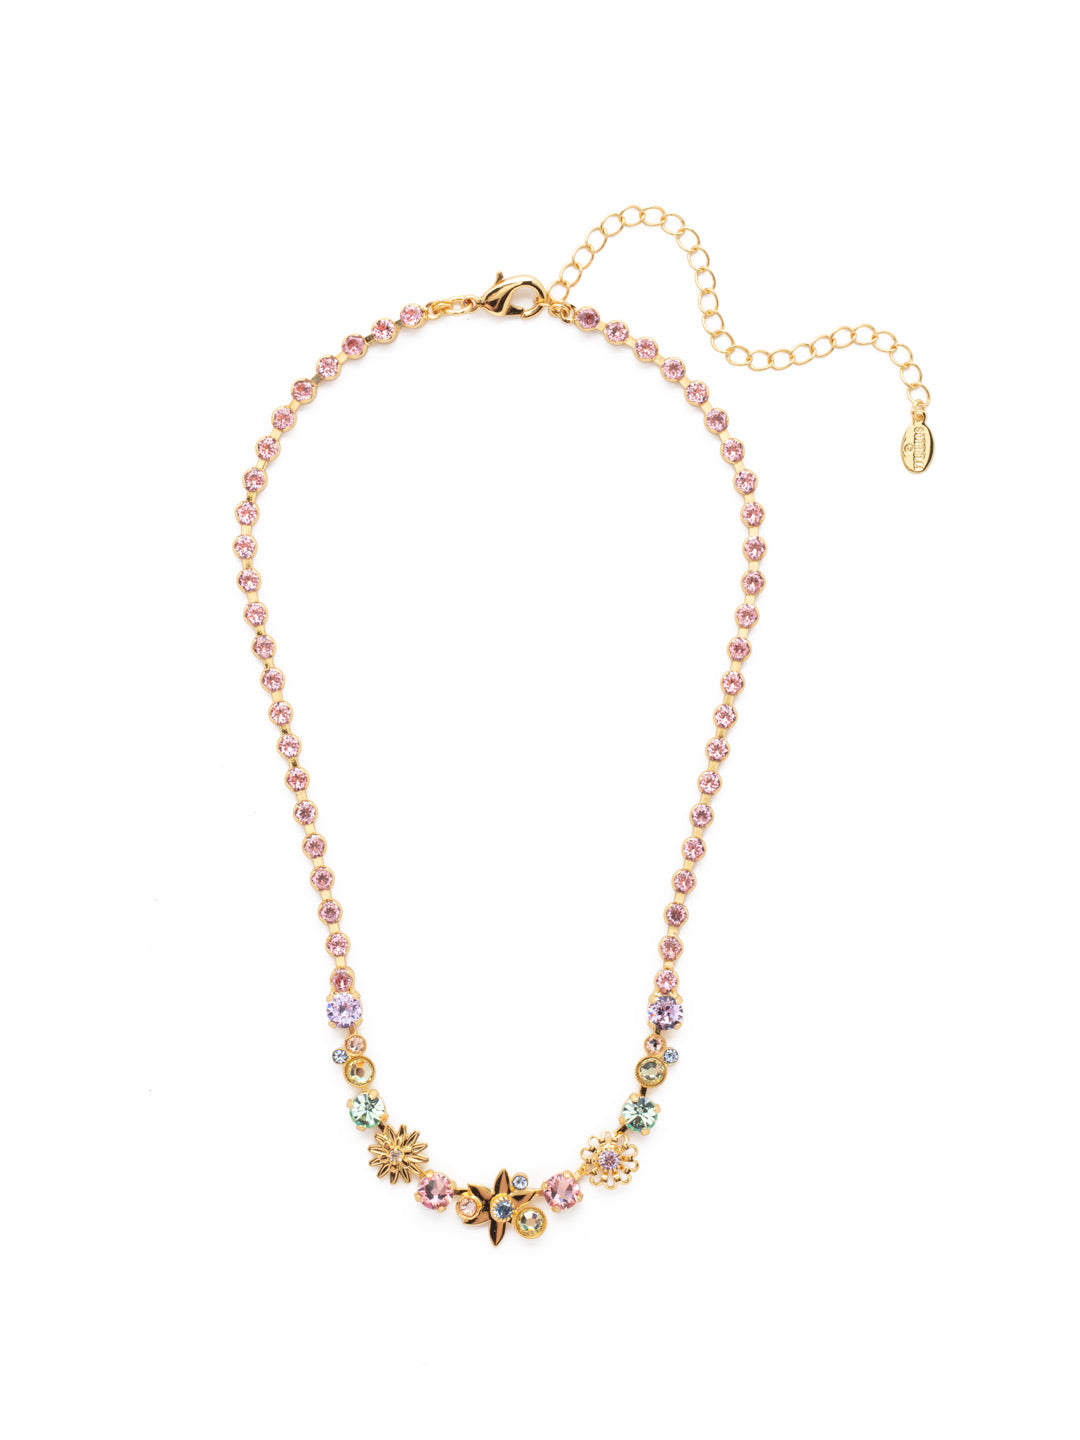 Roseanne Tennis Necklace - NEV13BGSPR - <p>The Roseanne Tennis Necklace is a big sparkler. Floral metalwork stands out on a strand entirely lined in round, sparkling crystals. You're sure to stand out in this one. From Sorrelli's Spring Rain collection in our Bright Gold-tone finish.</p>